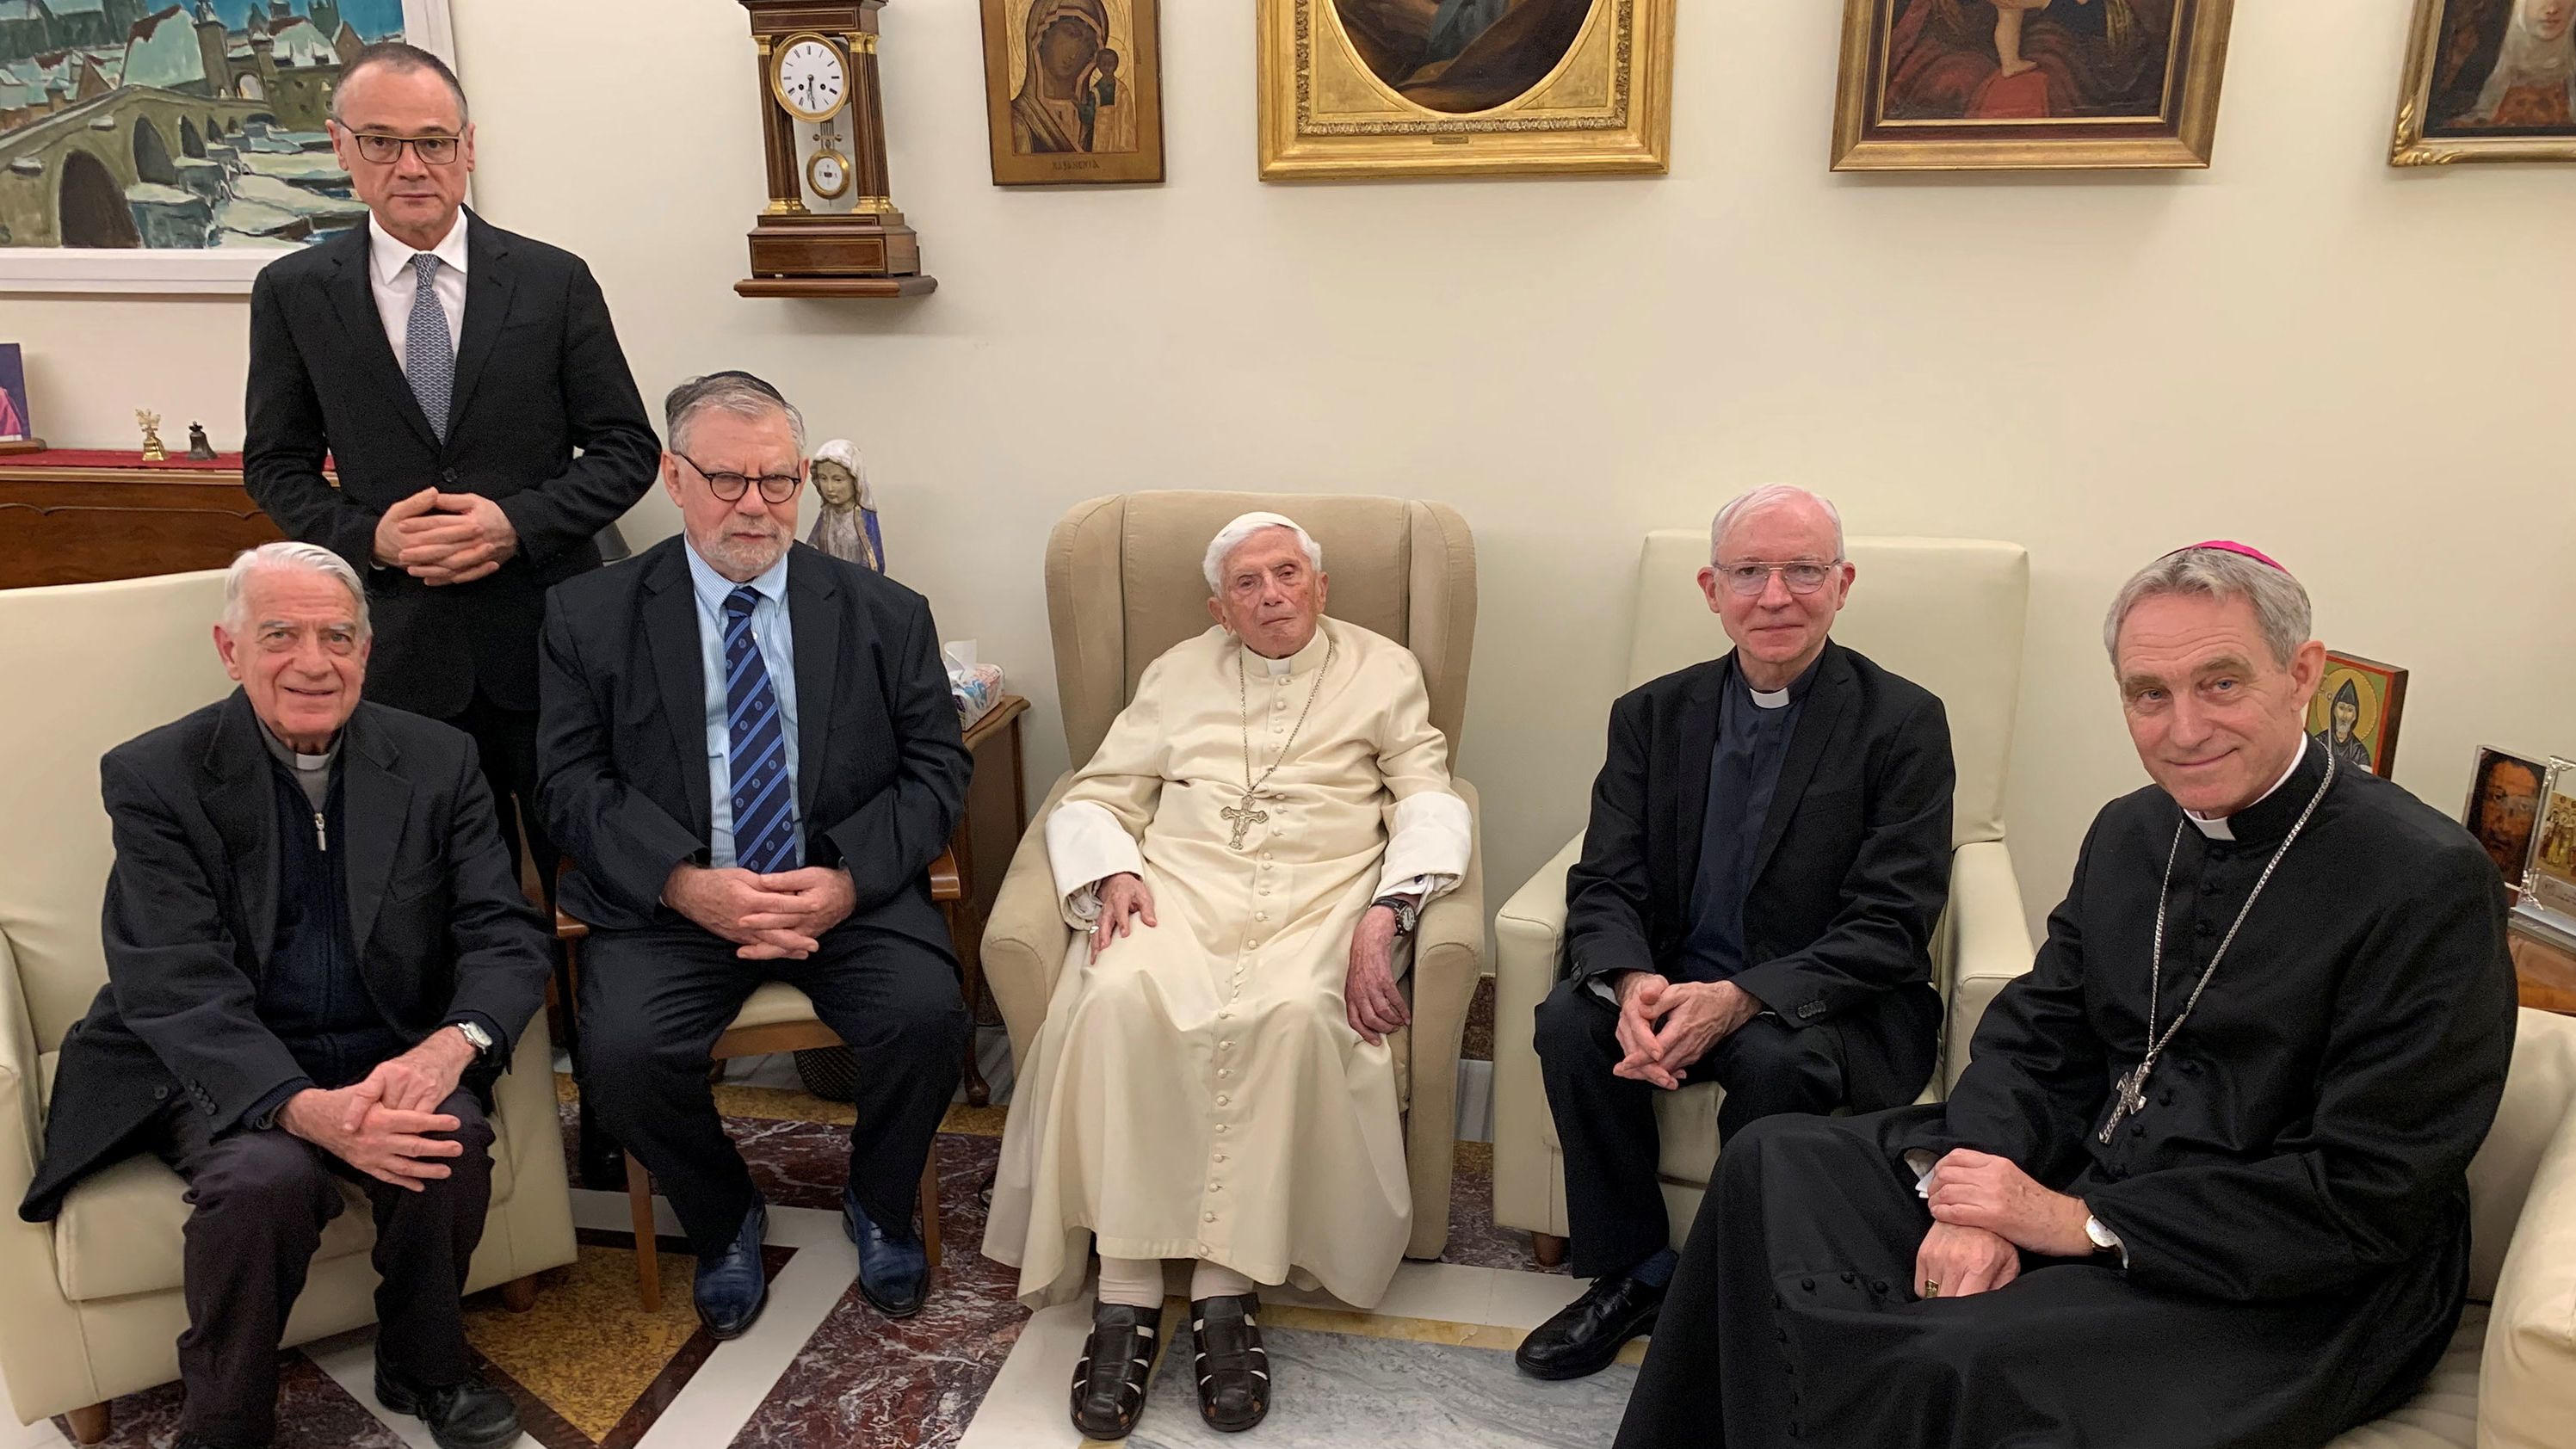 Benedict receives the winners of the Ratzinger Prize in December 2022. The award is given to scholars that have stood out for their scientific research in the field of theology.